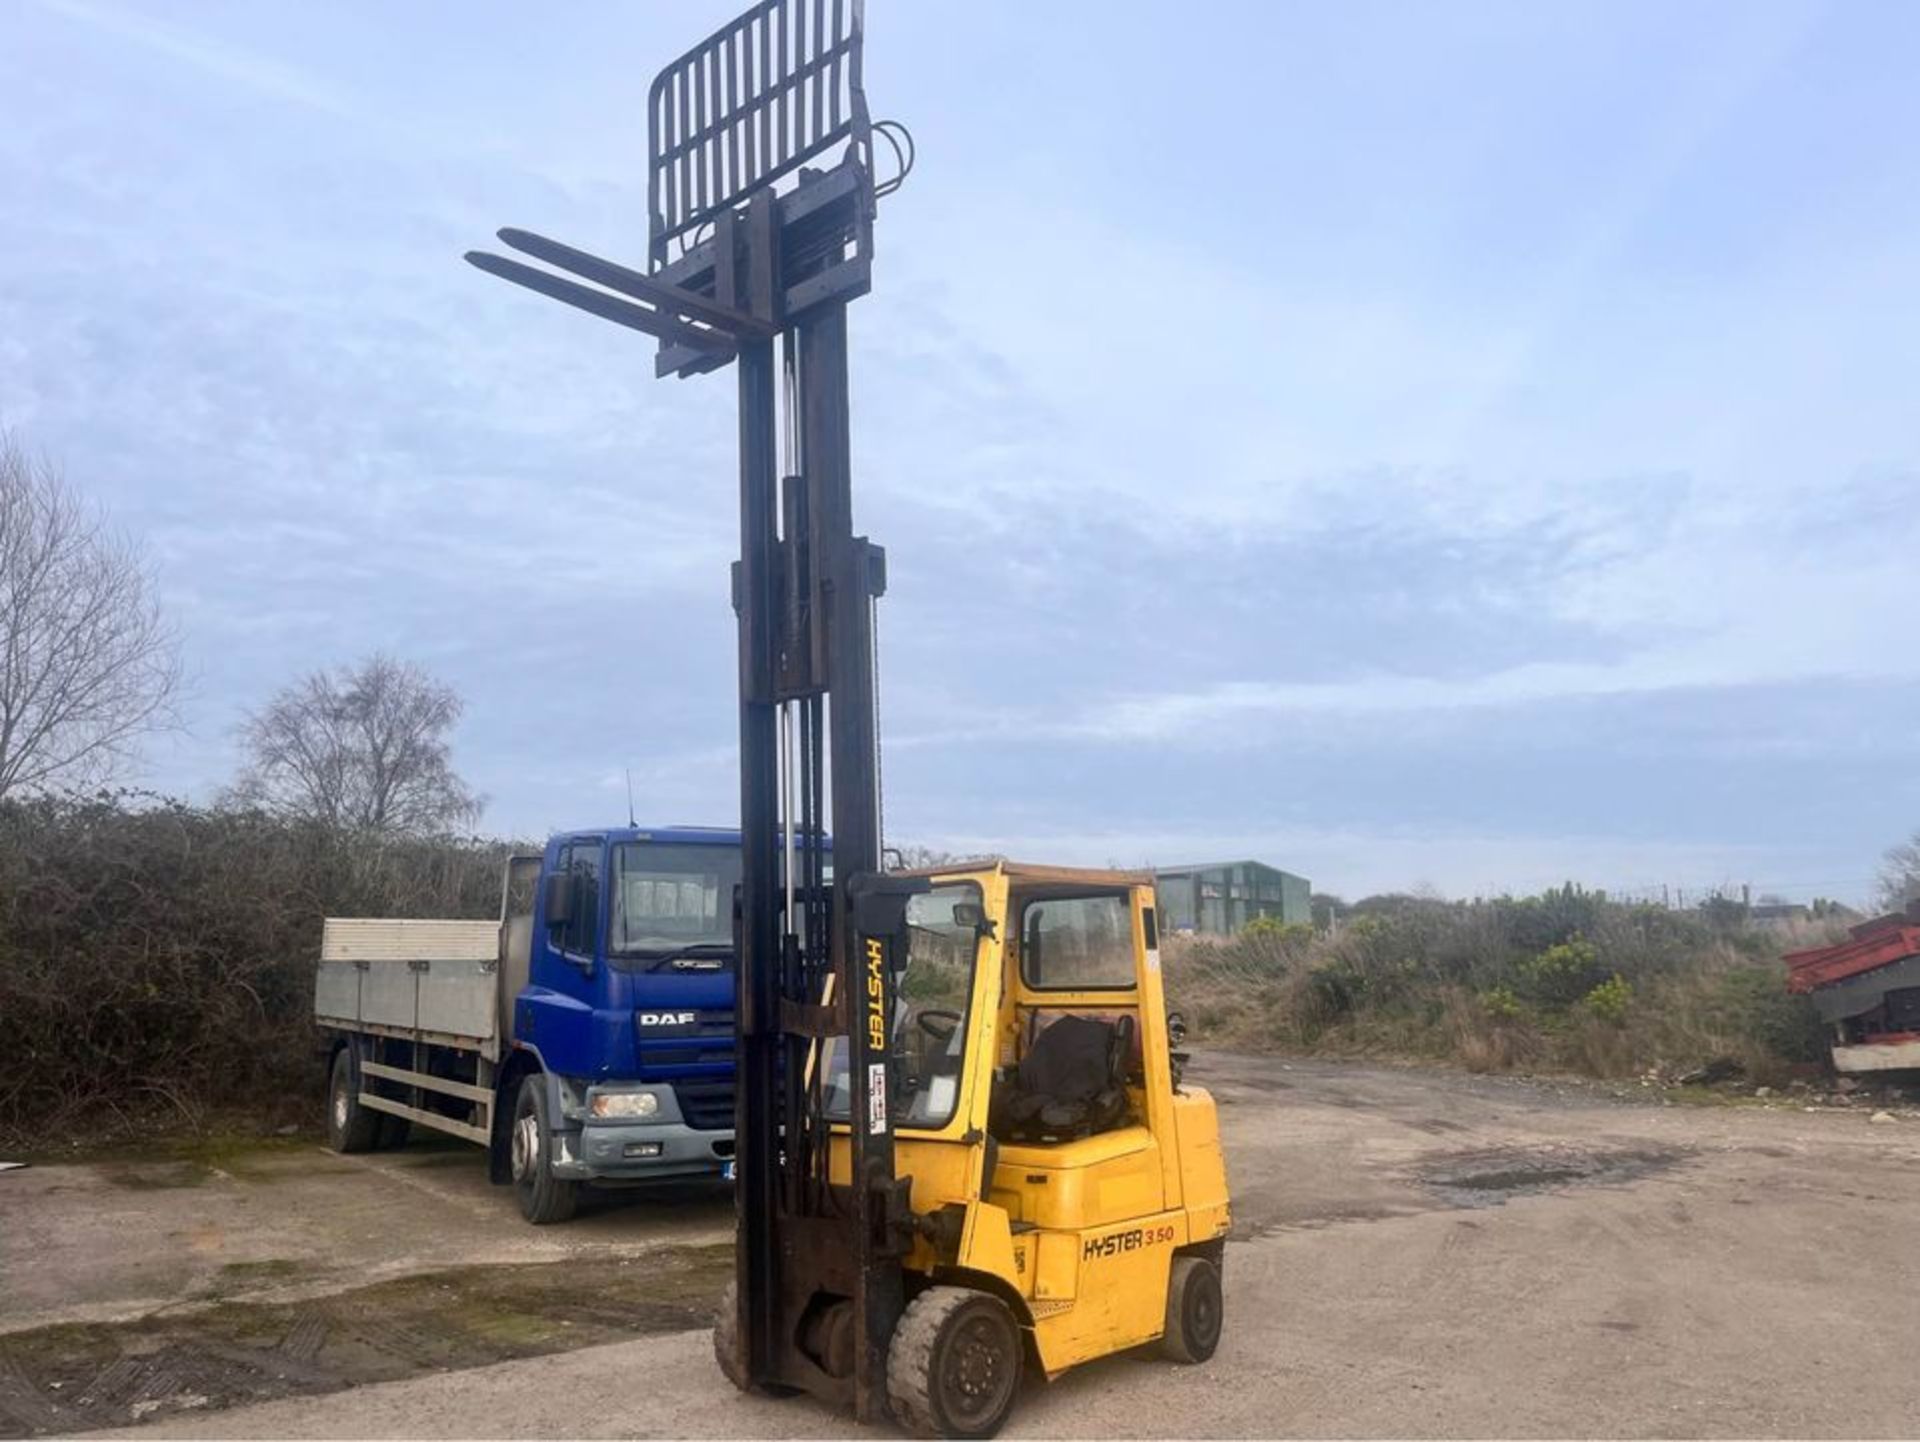 2006, HYSTER - 3.5 Ton Forklift - Image 13 of 16